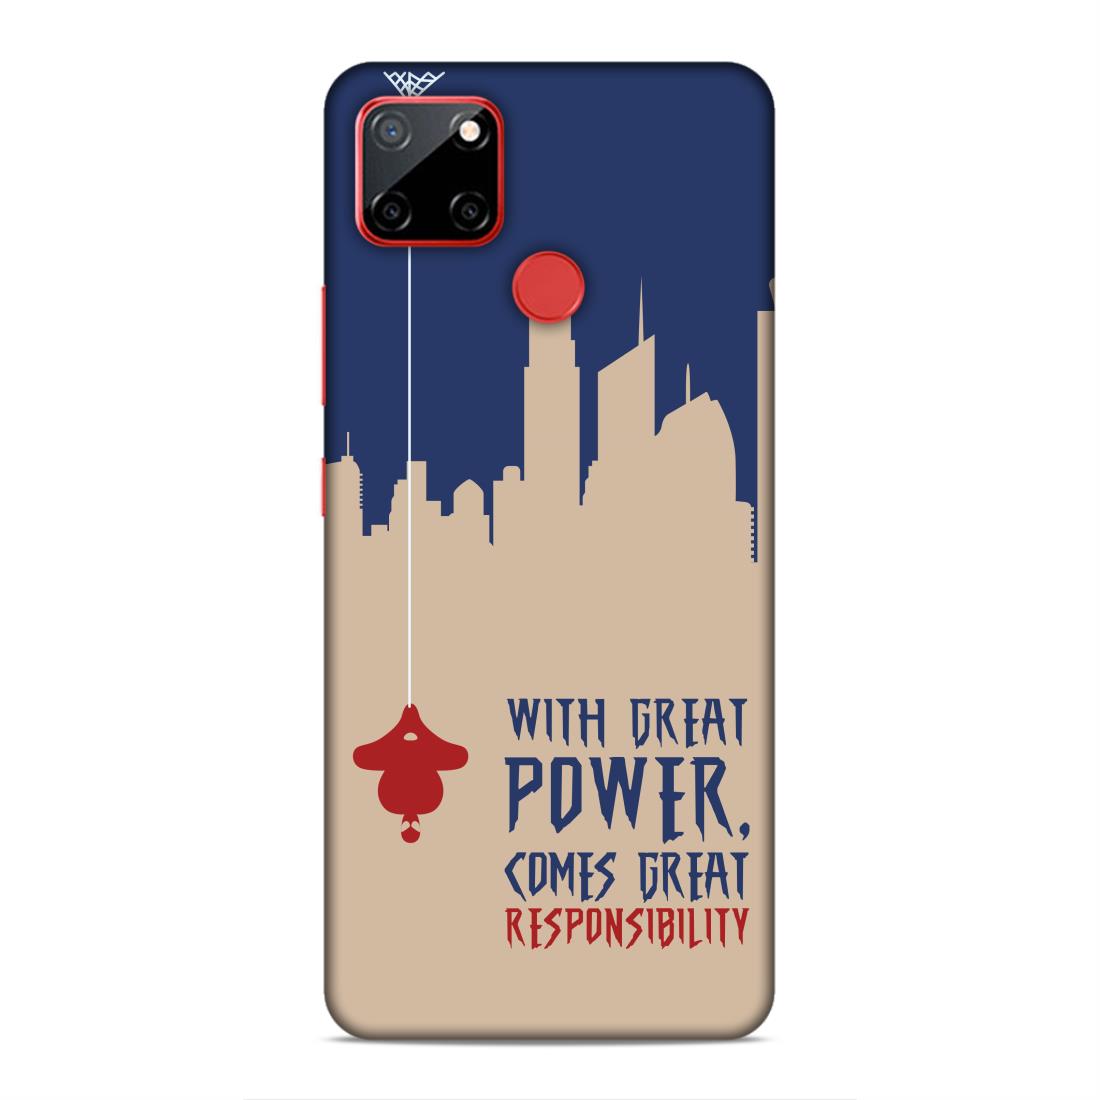 Great Power Comes Great Responsibility Hard Back Case For Realme C12 / C25 / C25s / Narzo 20 / 30A